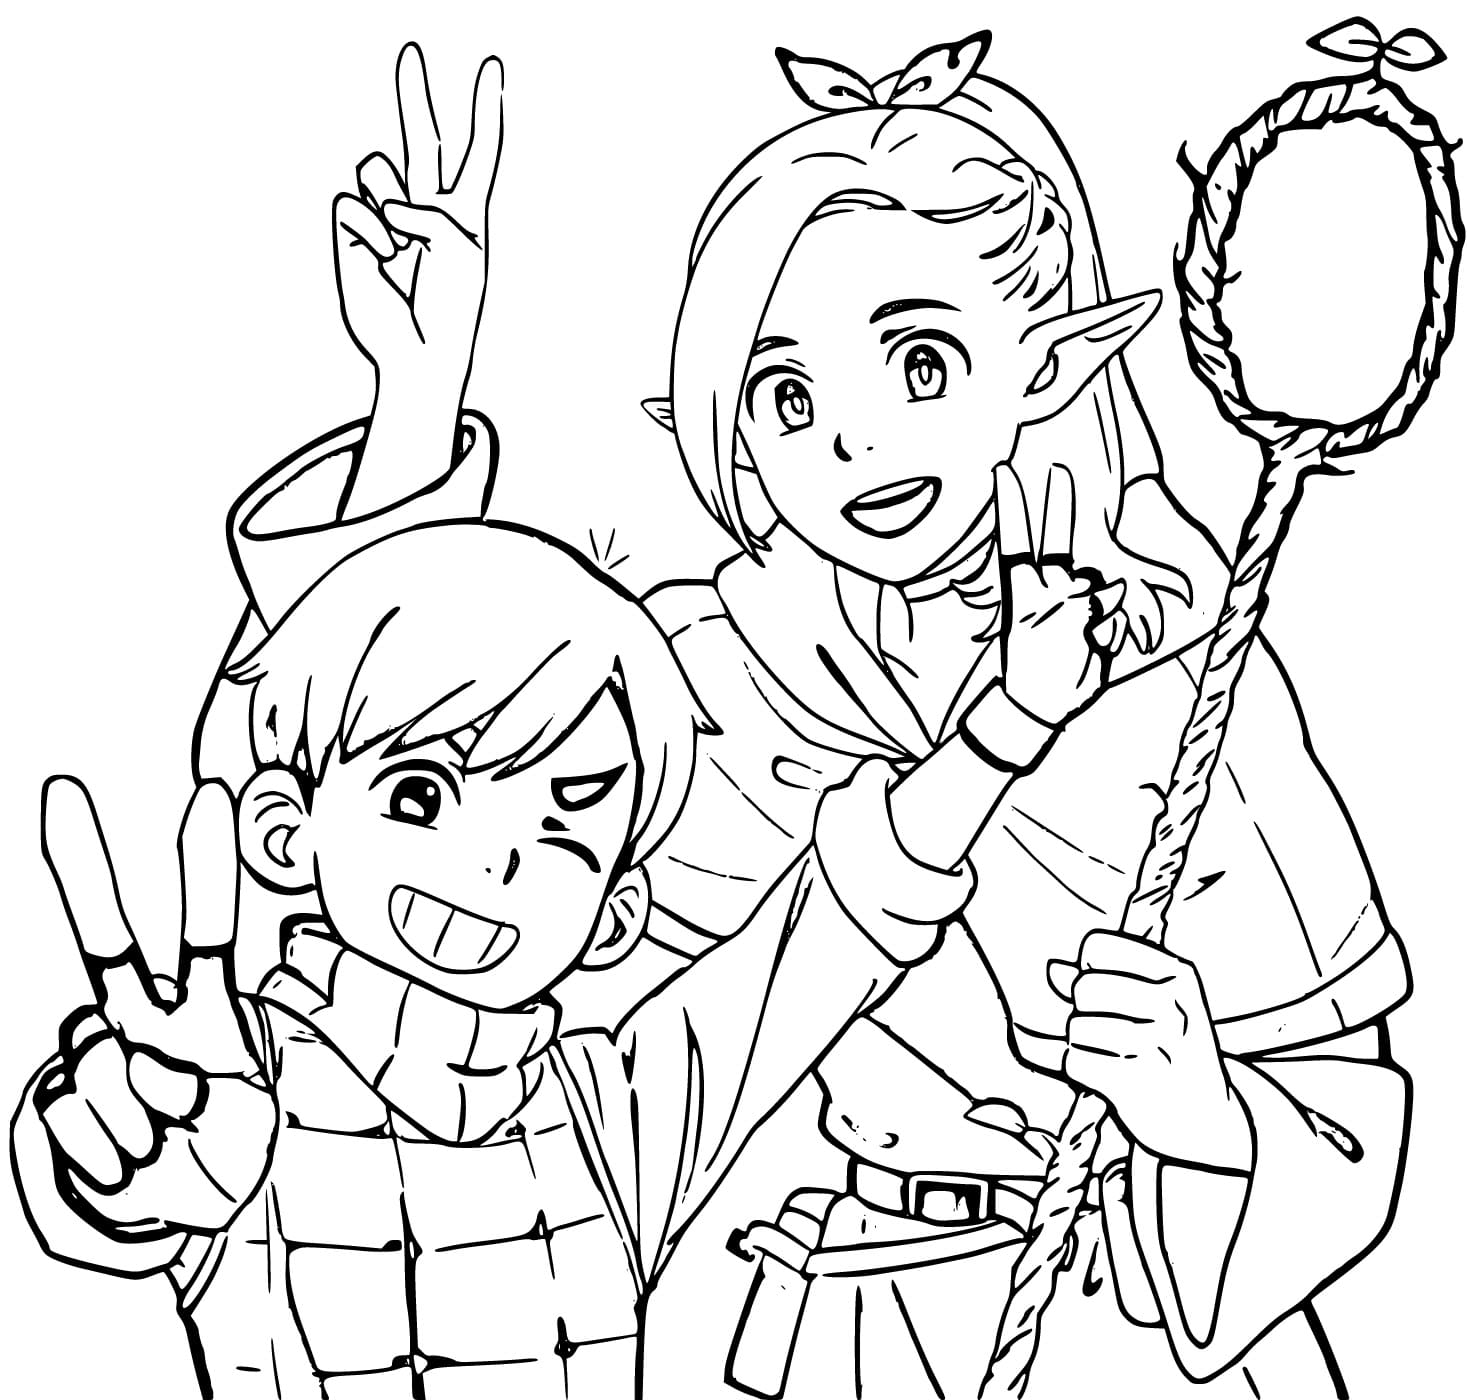 Printable Delicious in Dungeon Coloring Pages